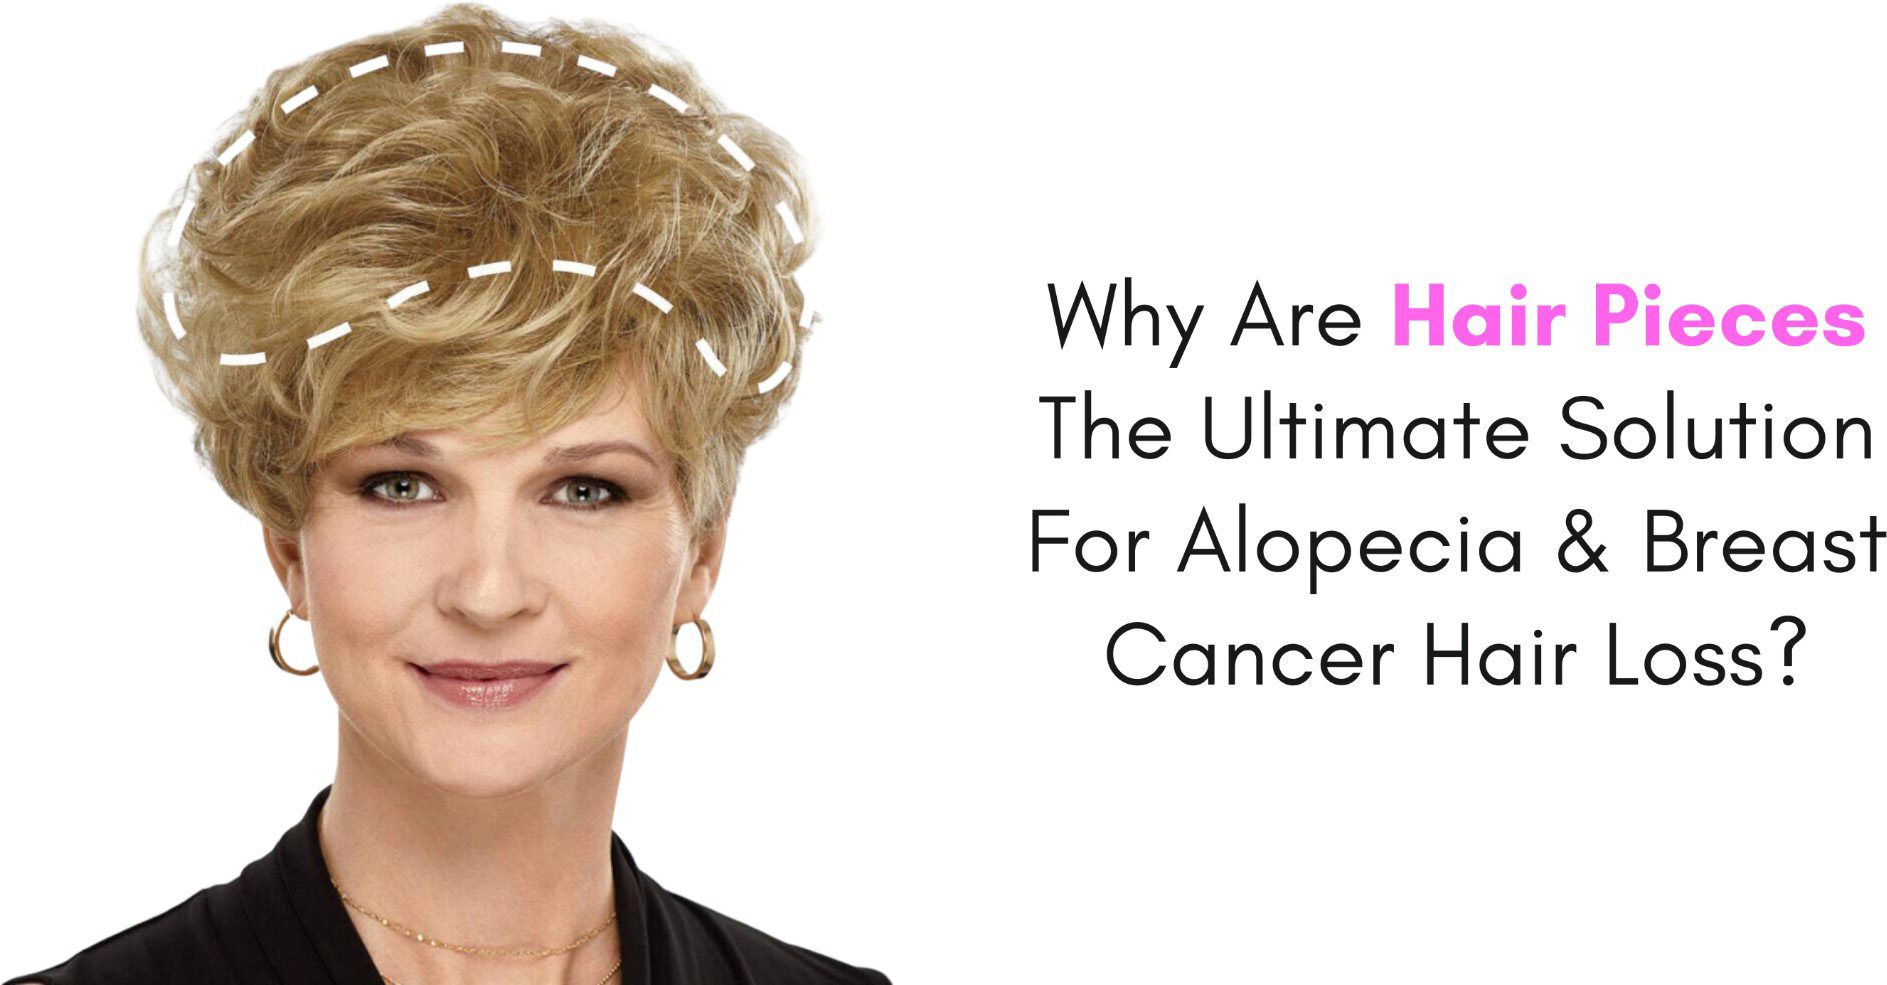 Why Are Hair Pieces The Ultimate Solution For Alopecia & Breast Cancer Hair Loss?